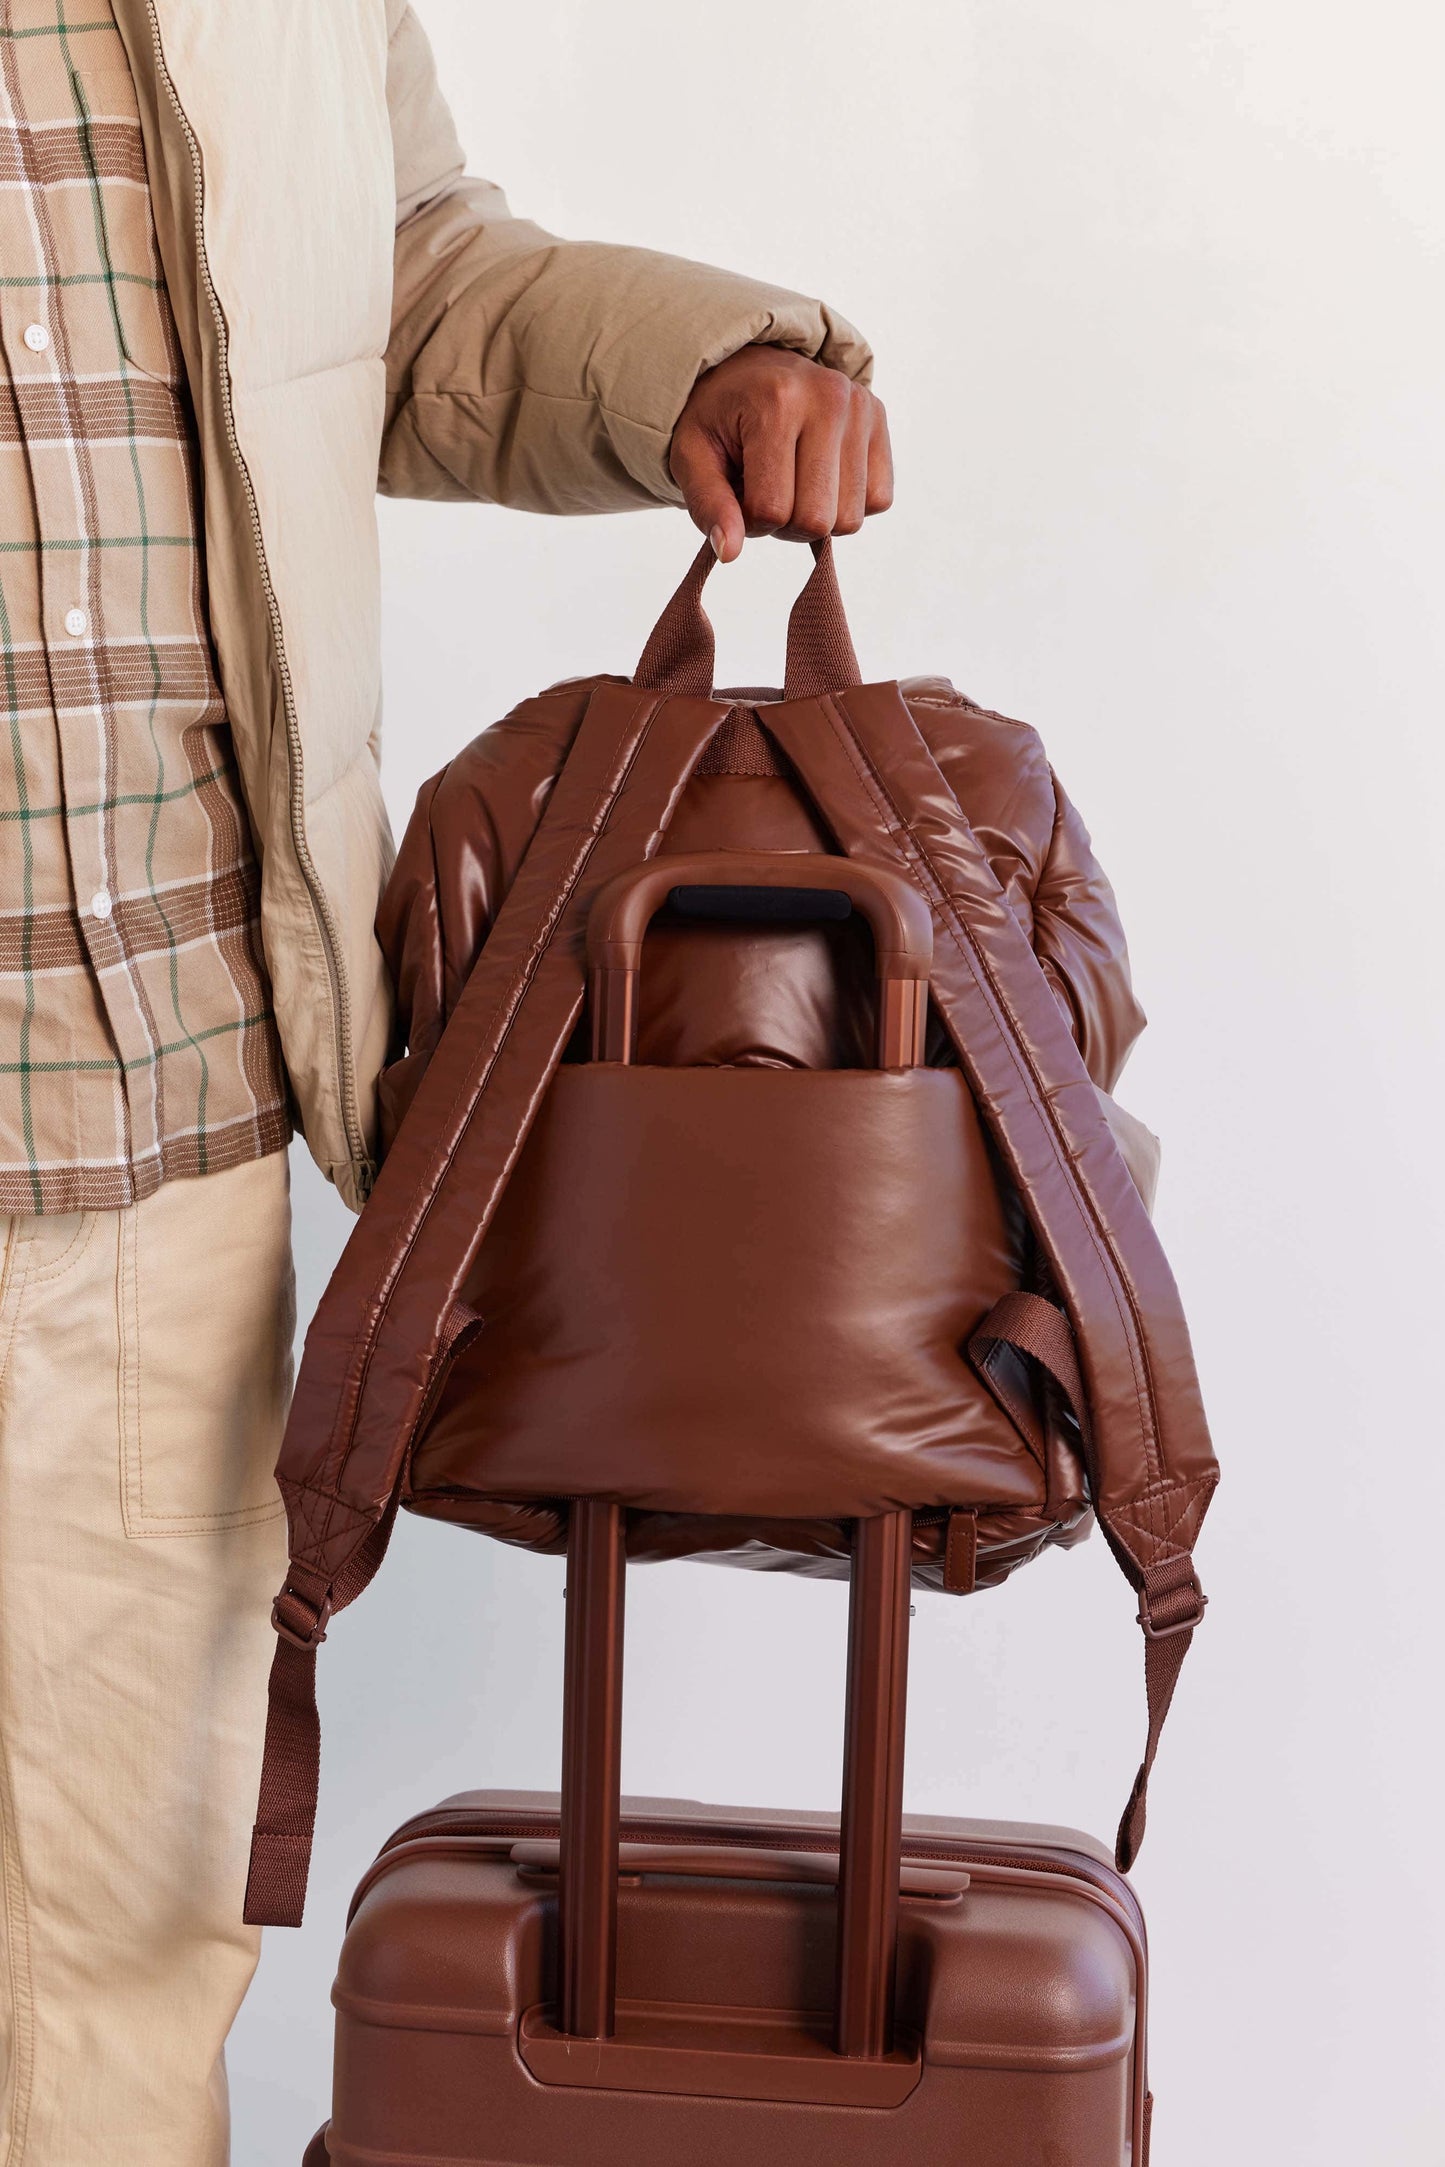 The Cargo Backpack in Maple